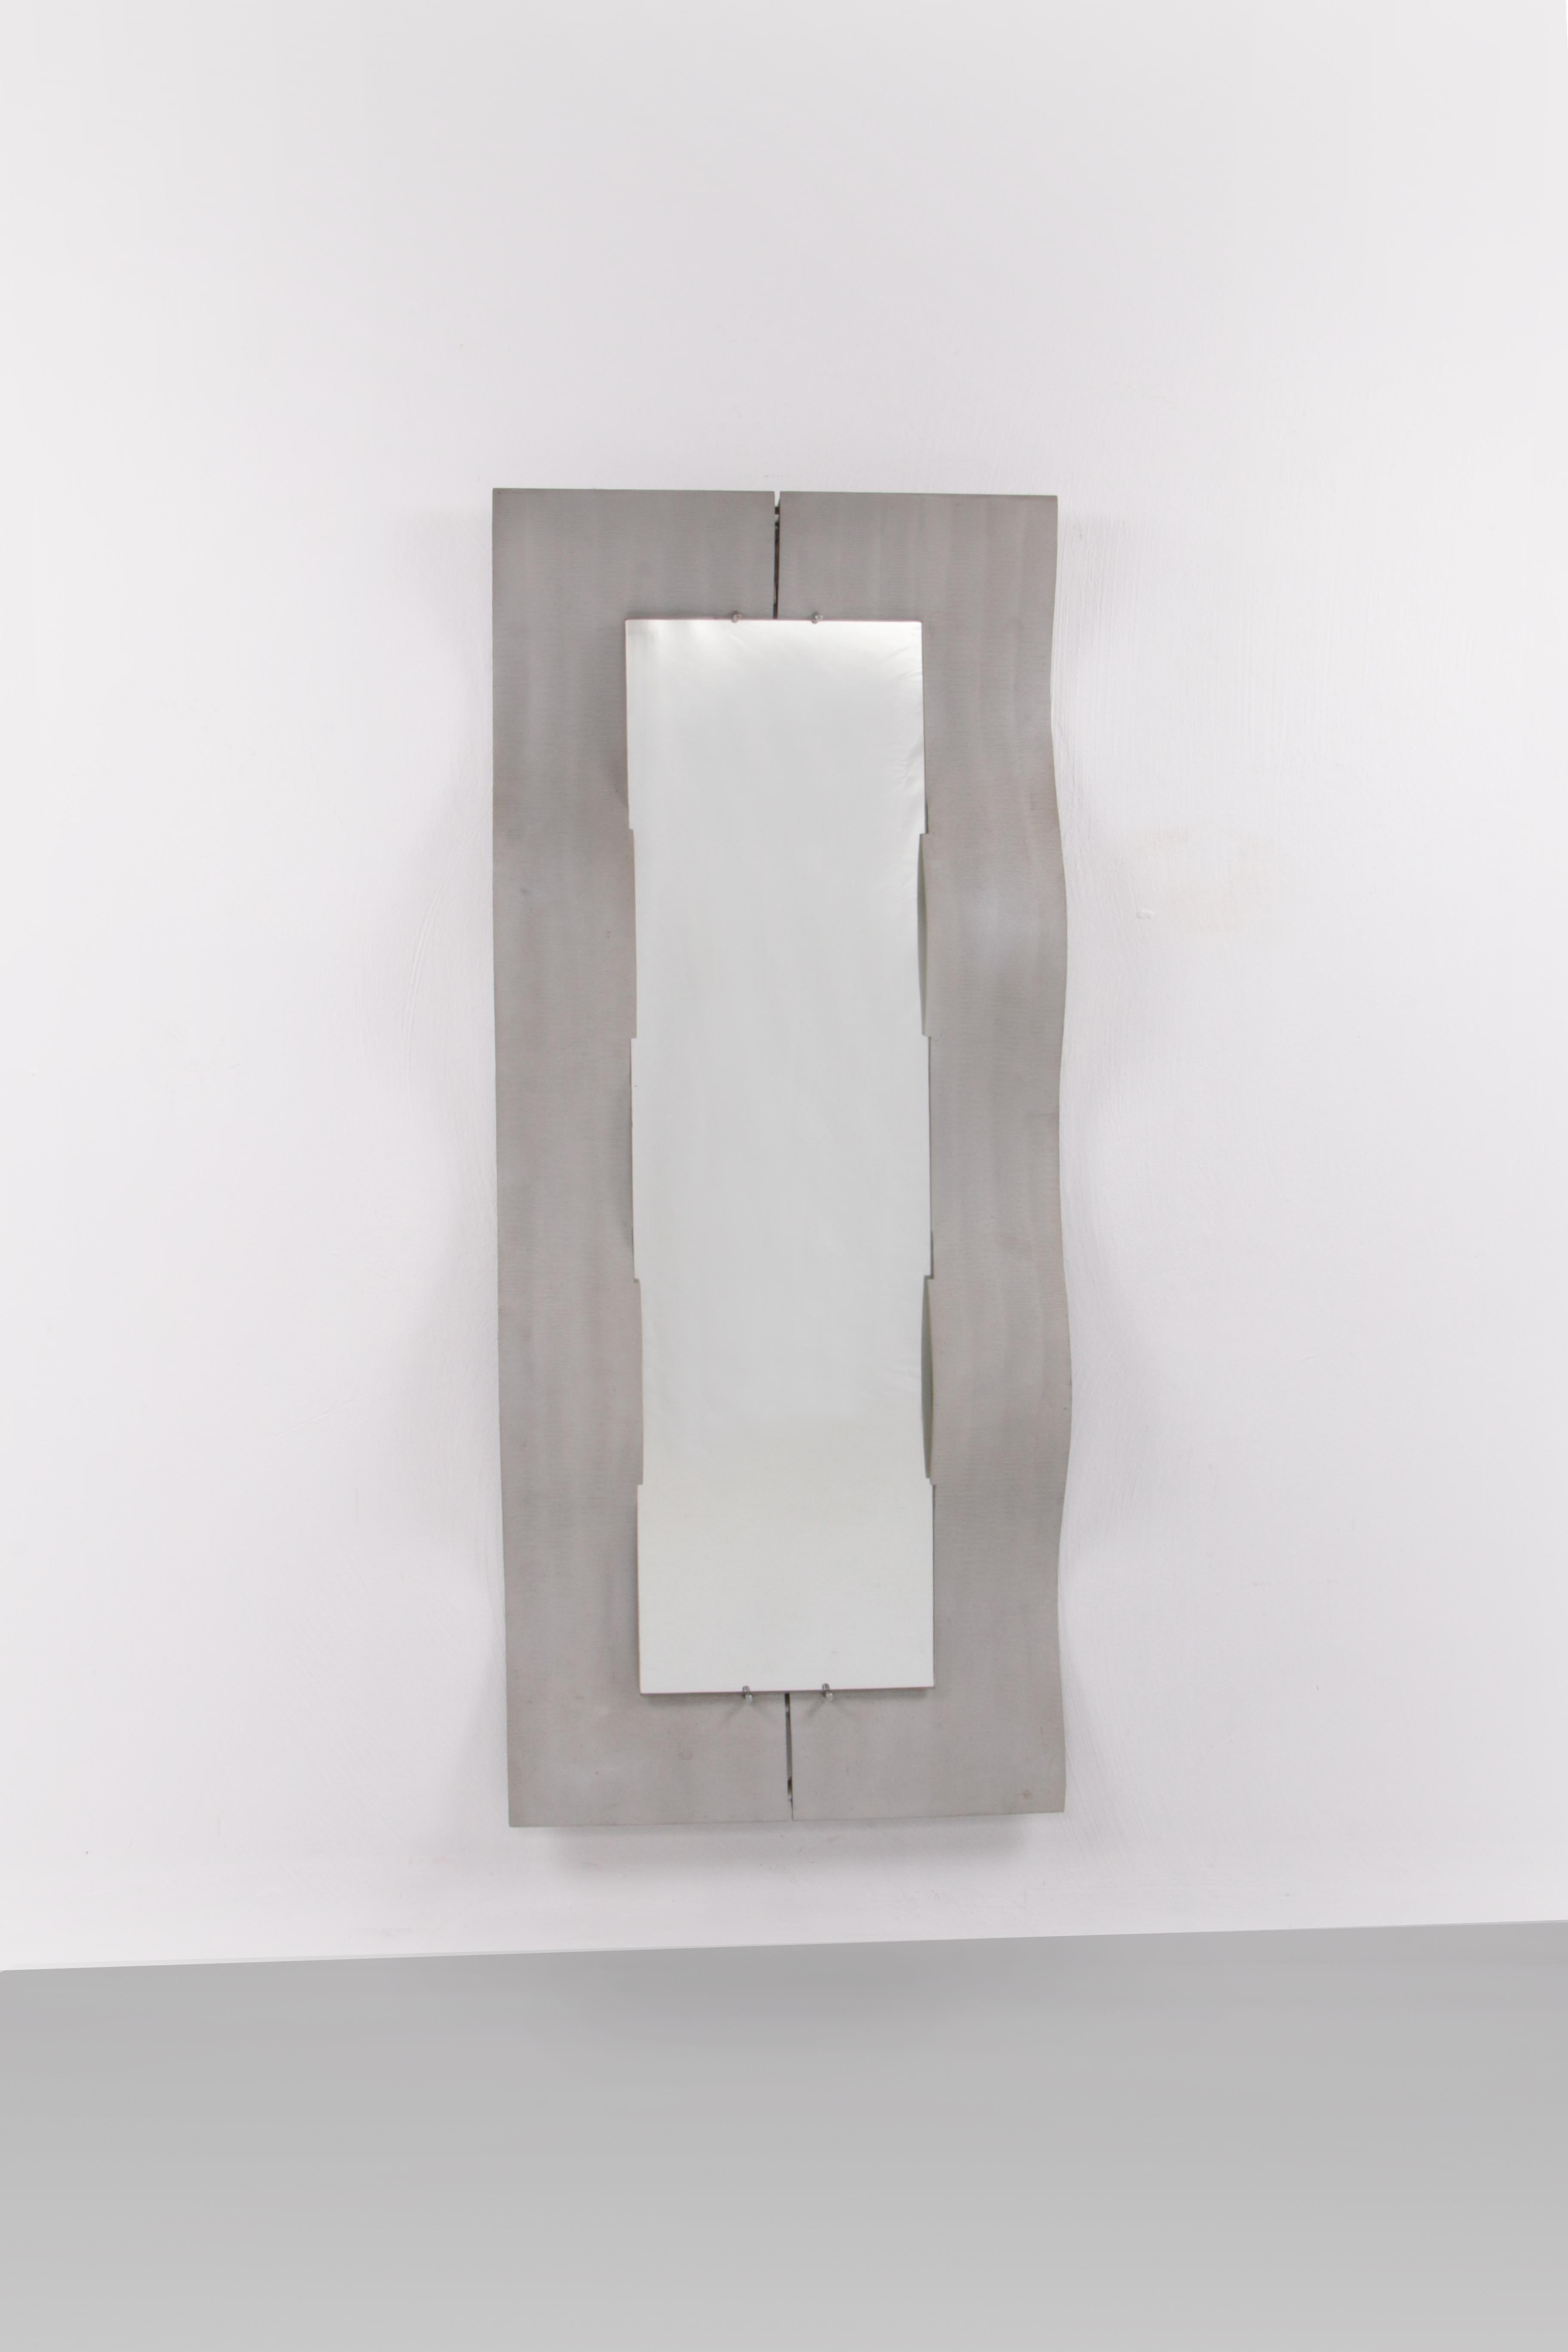 Large wall mirror design by Lorenzo Burchiellaro 1970, Italy


Large wall mirror design by Lorenzo Burchiellaro 1970, Italy.

Studio Burchiellaro Padova, mirror in etched aluminum, Italy 1970s Elongated mirror in etched and cast aluminum High